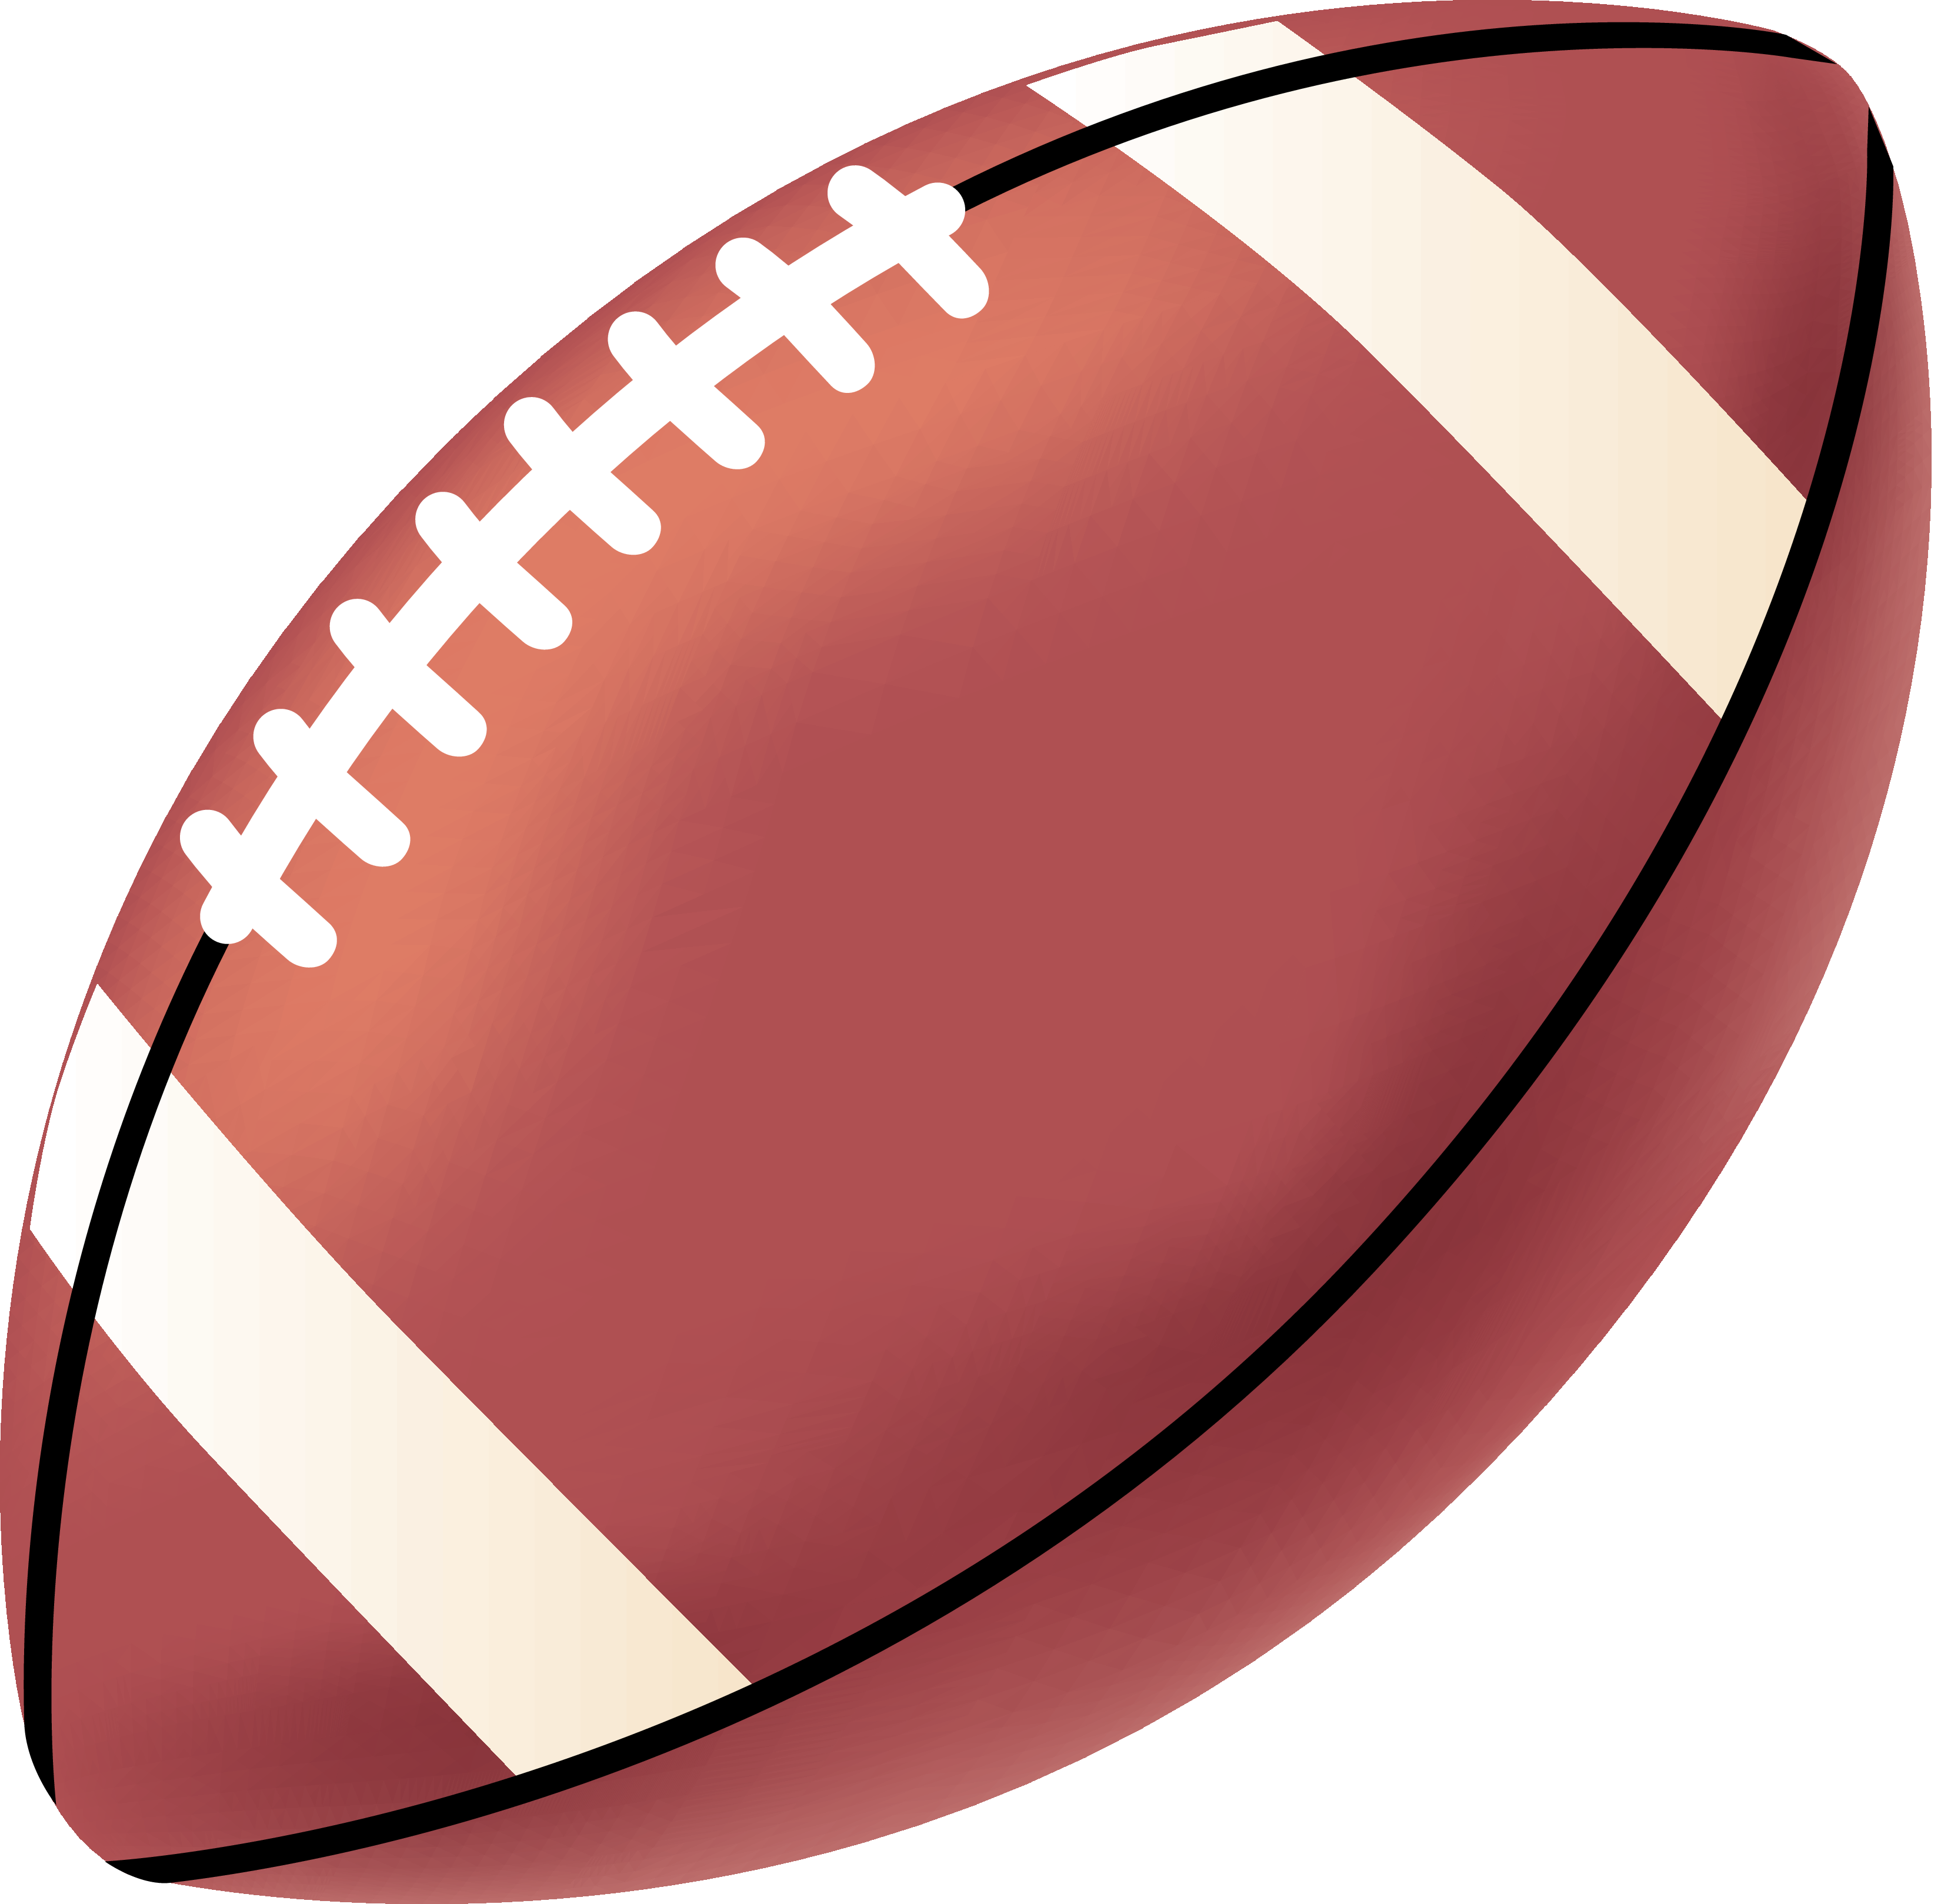 Football pictures clip art fr